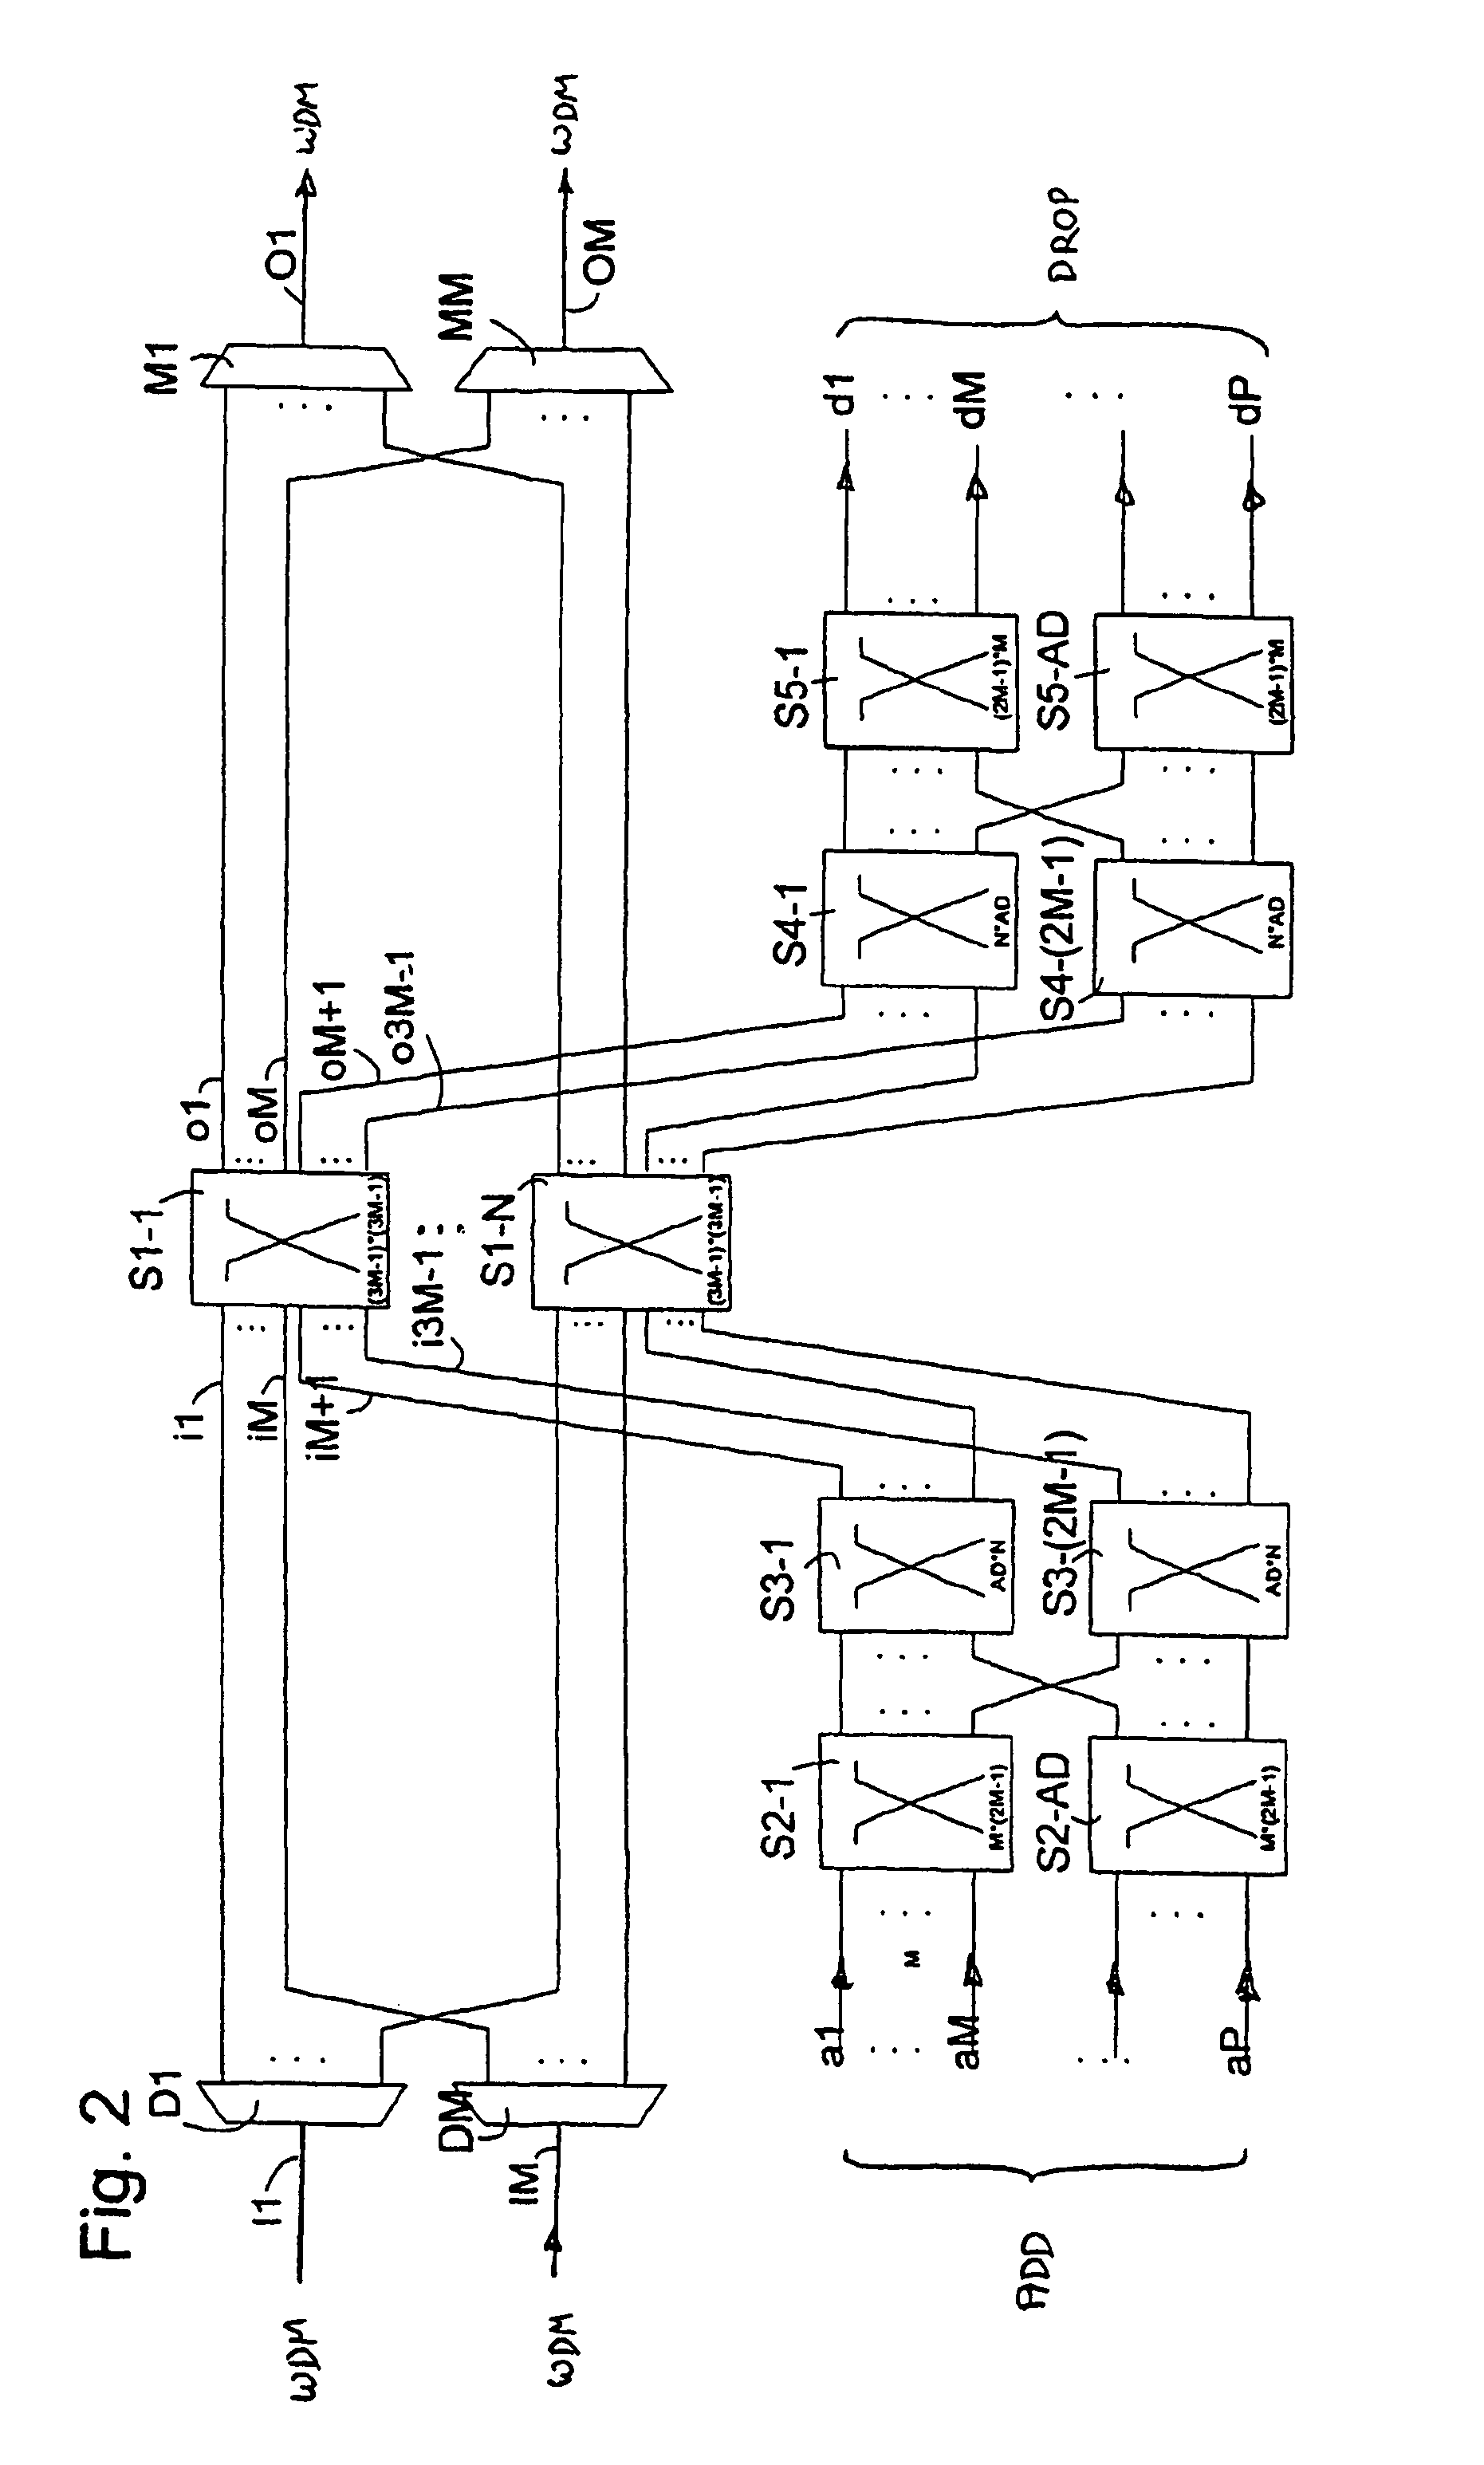 Optical cross-connector containing multi-stage Clos network in which a single-stage matrix comprises one stage of the Clos network